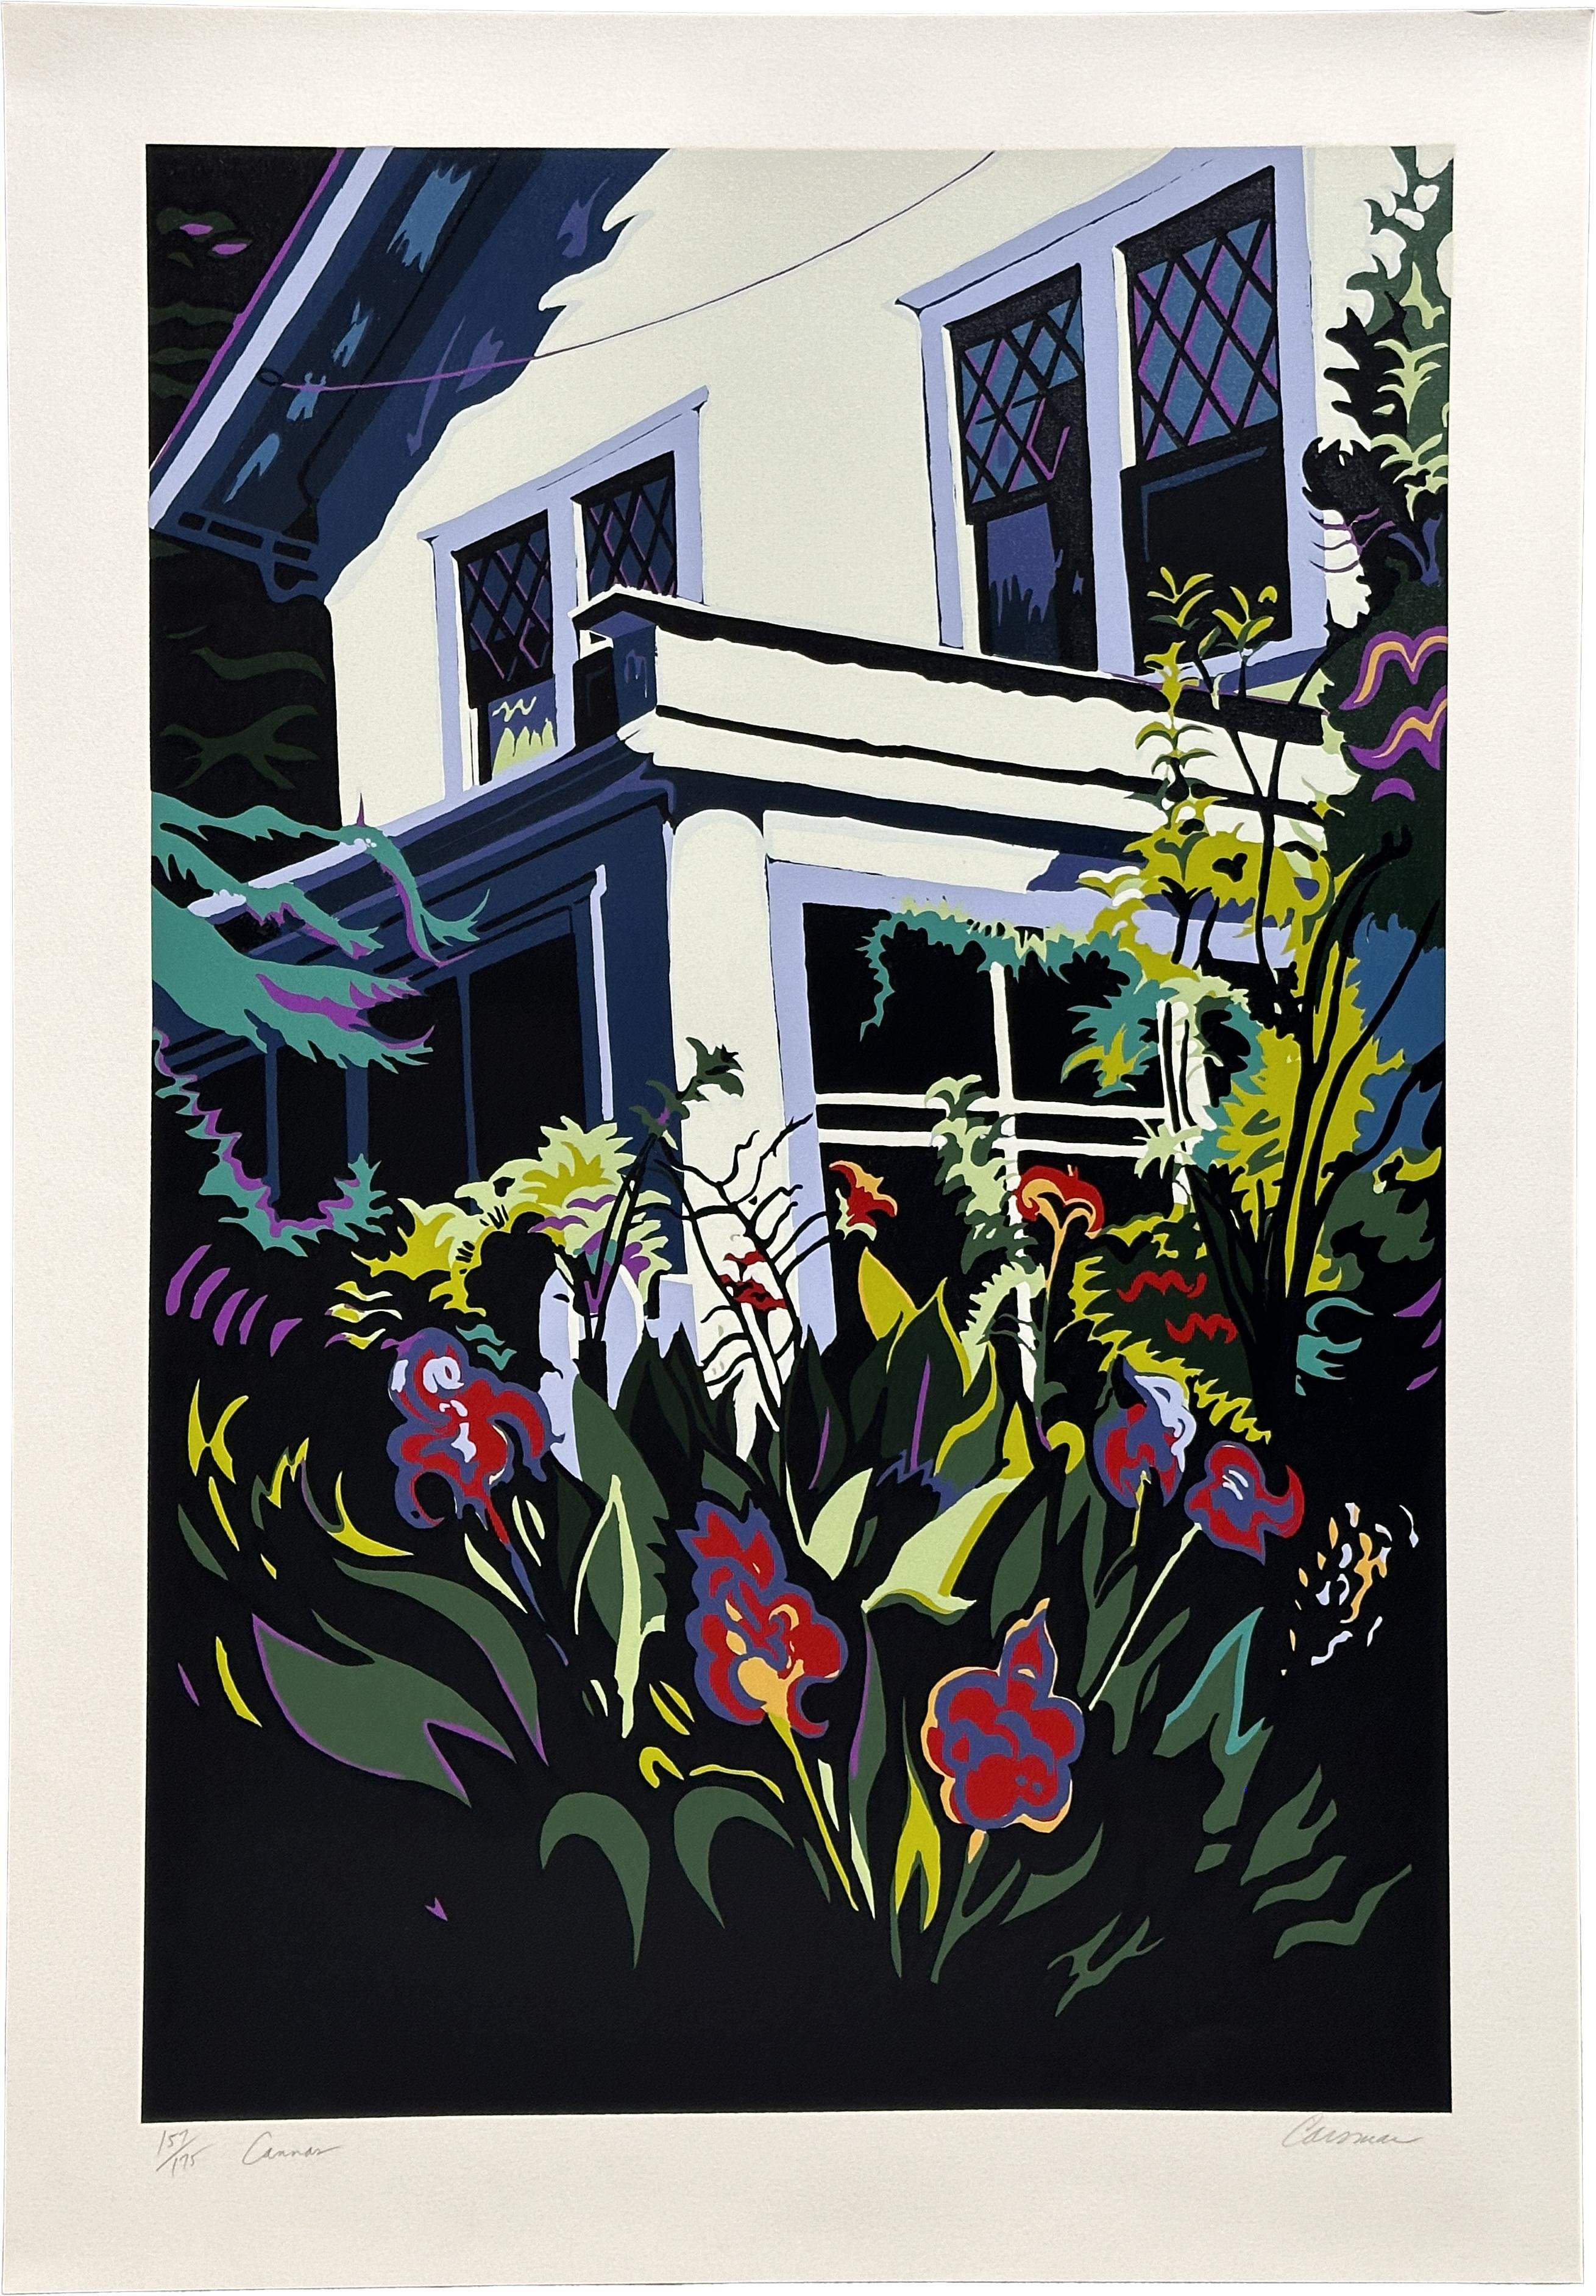 Jon Carsman Landscape Print - Cannas 1978 Signed Limited Edition Screen Print on Arches